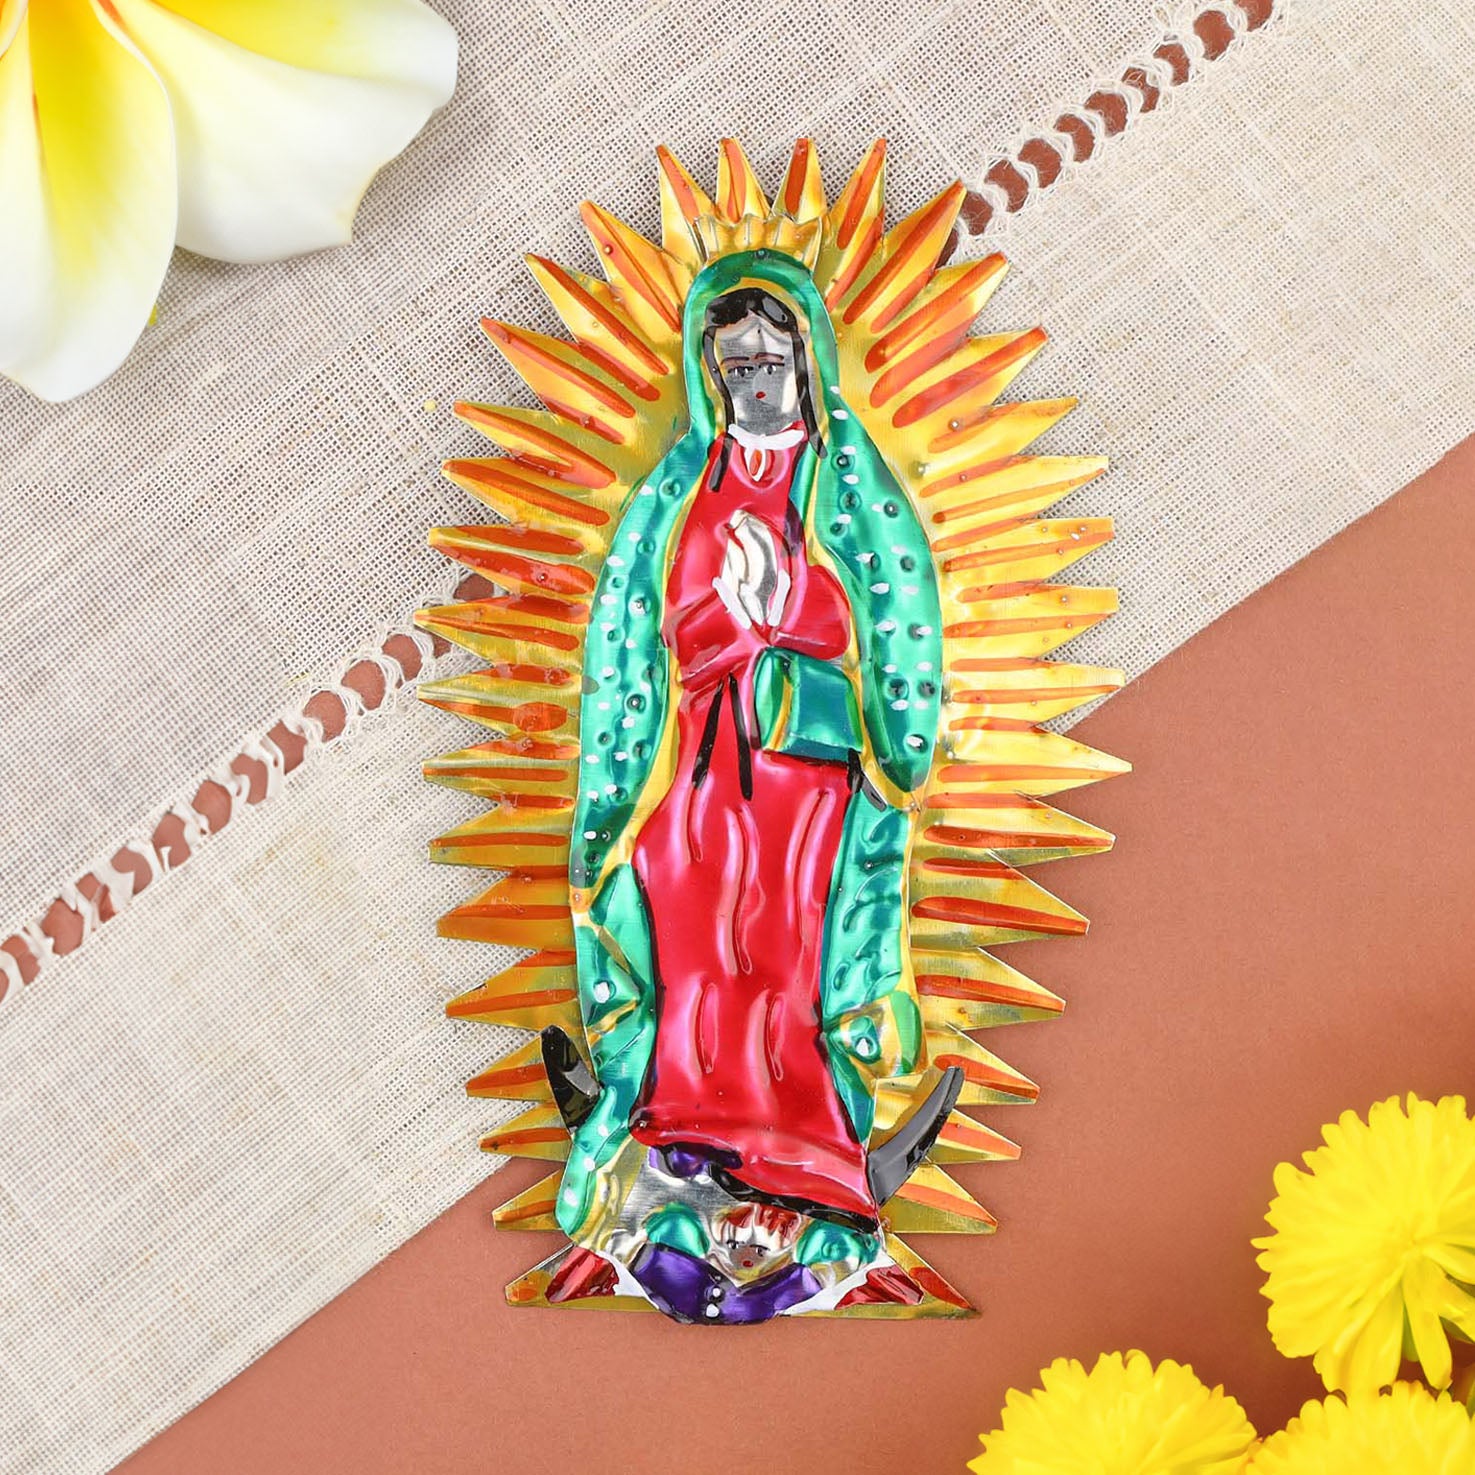 Virgen de Guadalupe Hot and Cold Drink Tumbler – Everything Under